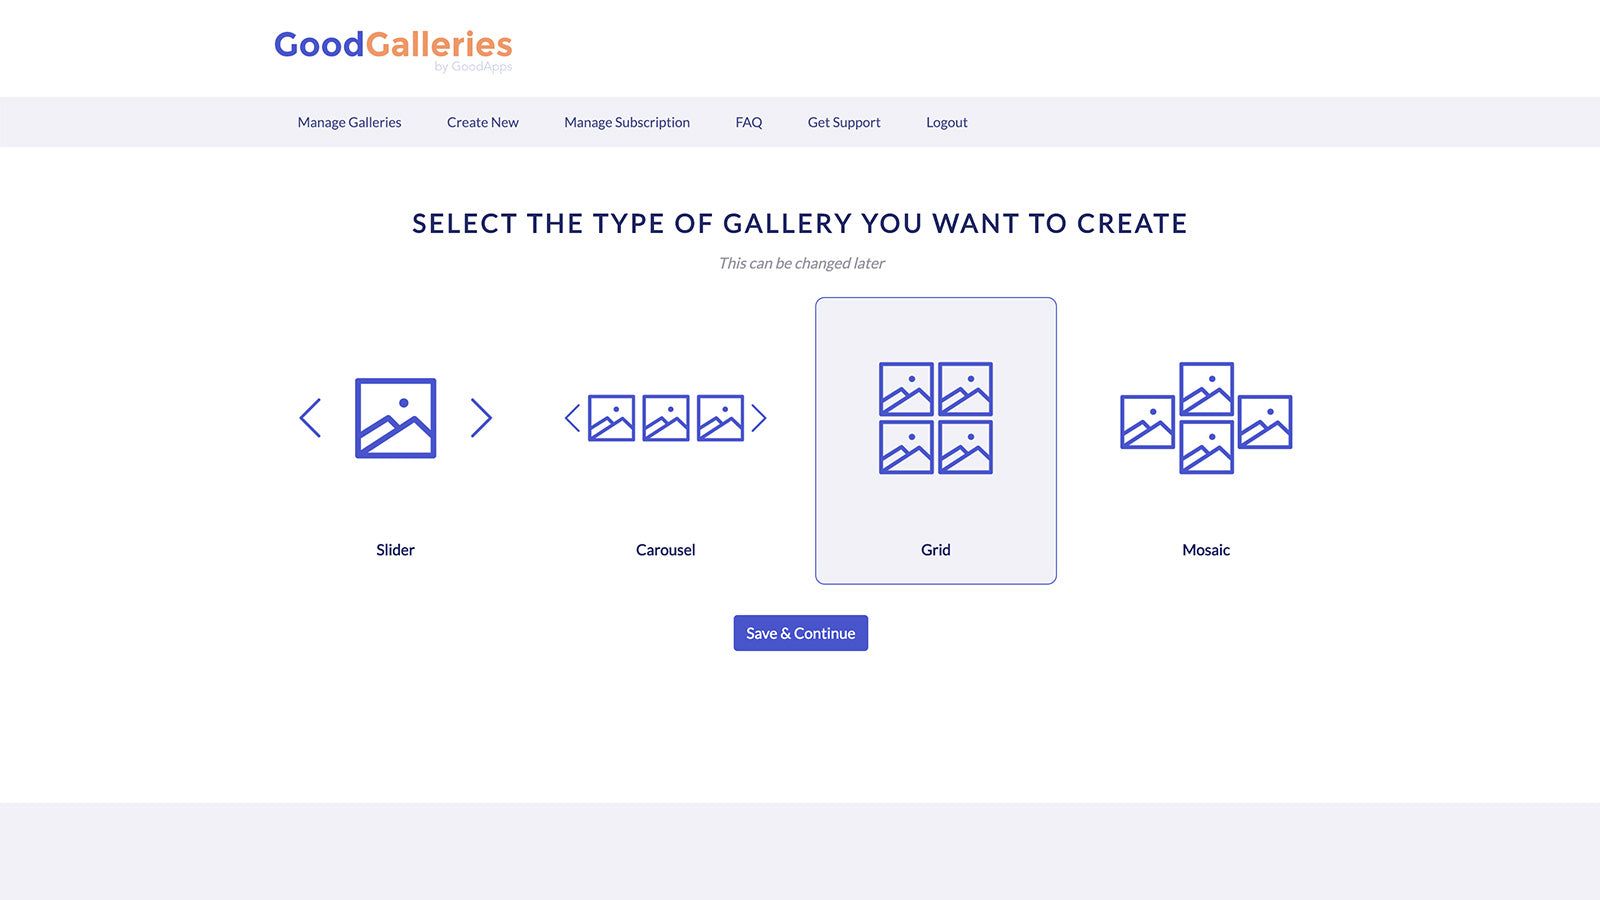 Select from various types of galleries